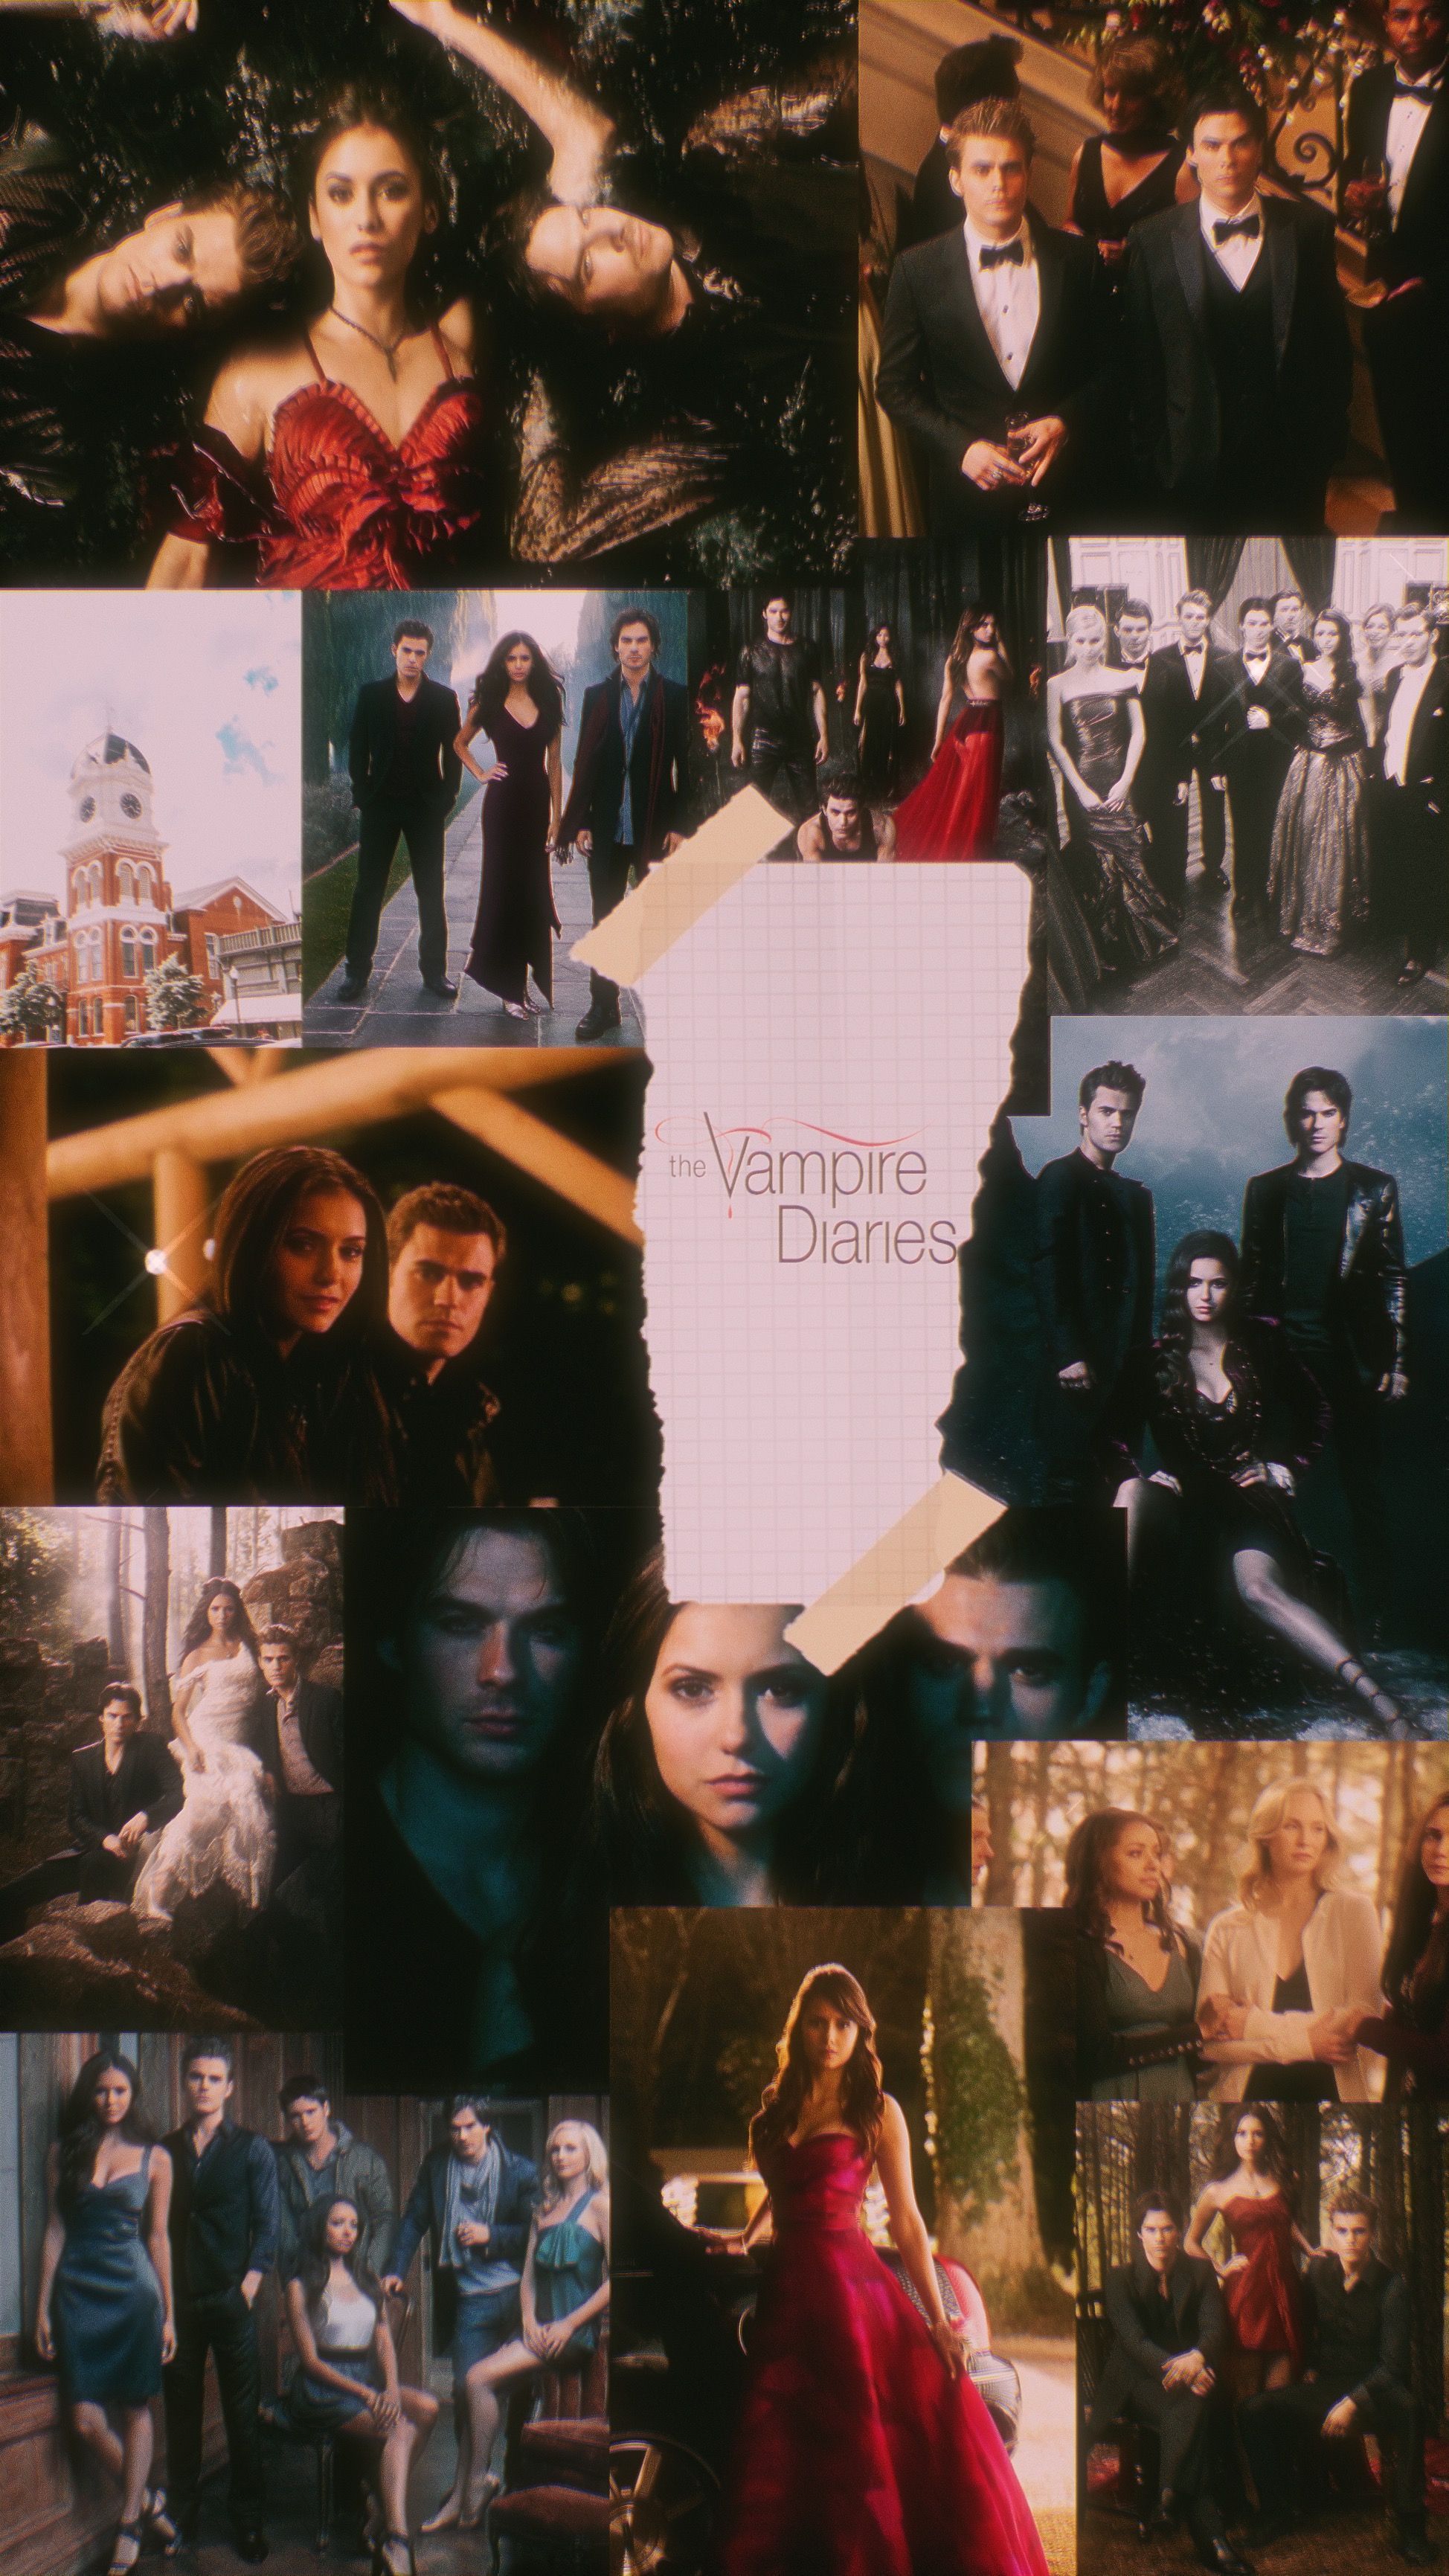 A collage of pictures from the vampire diaries - Vampire